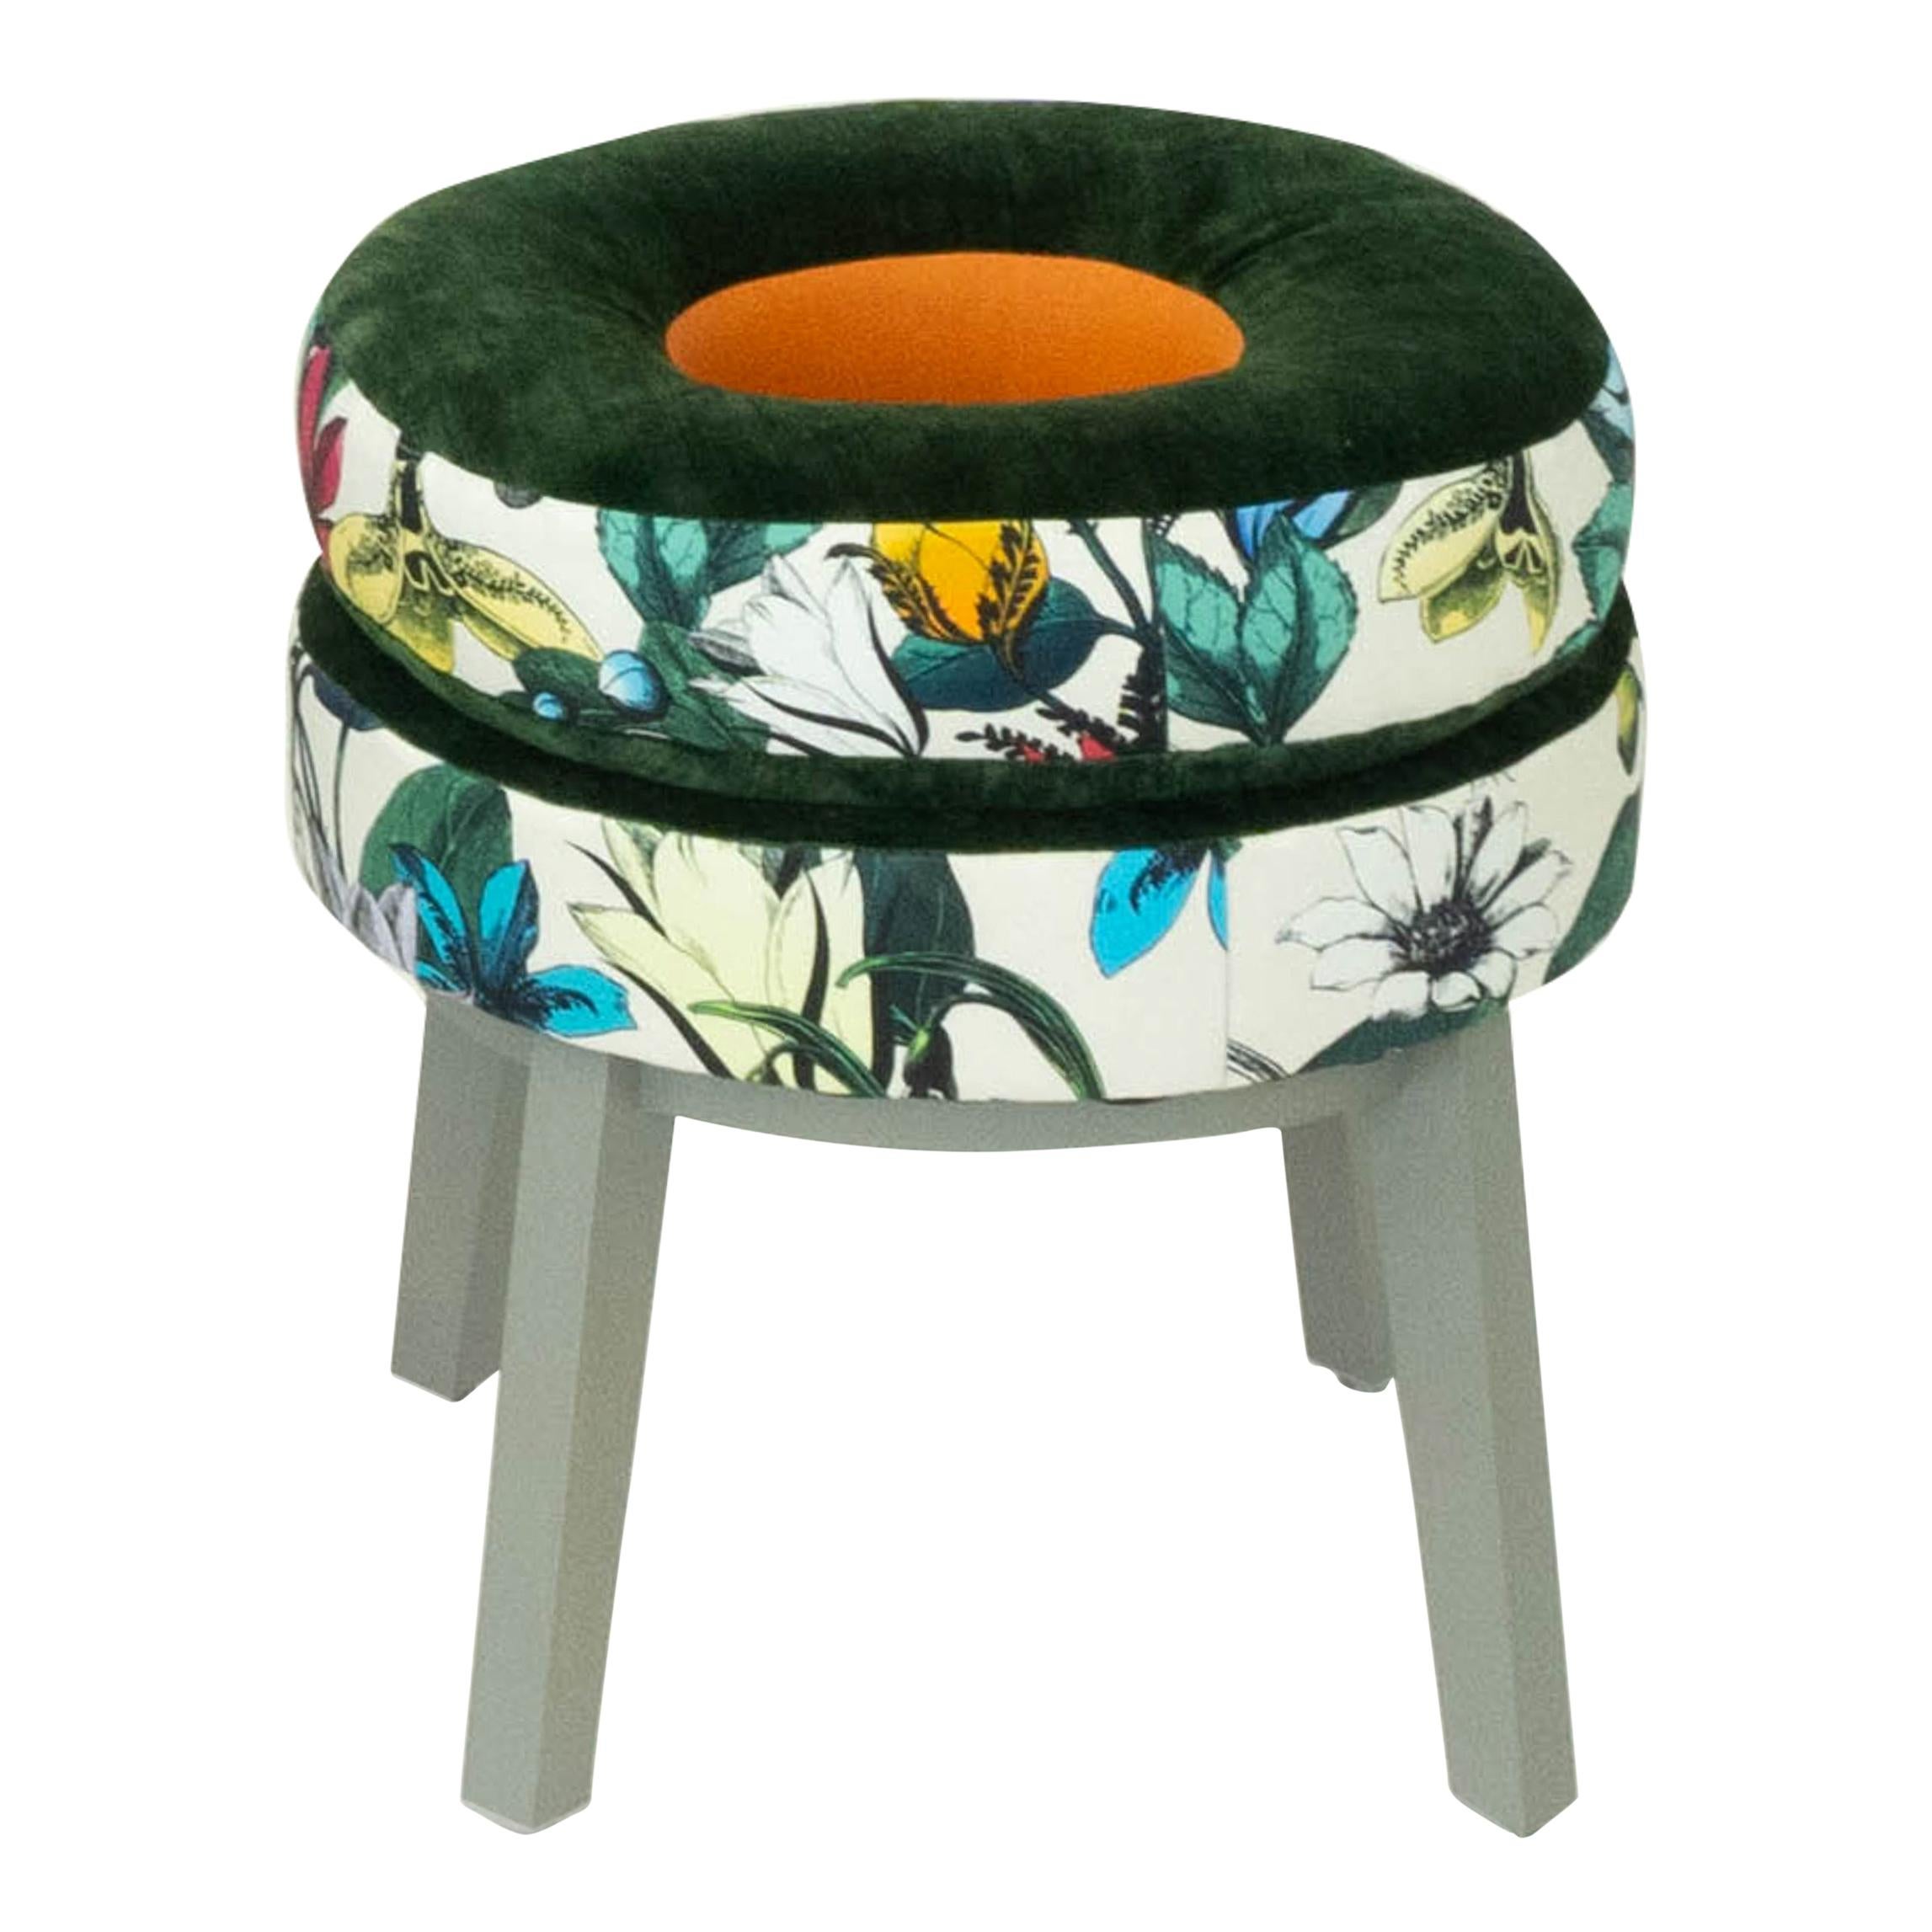 Small Round Stool with Green Velvet and Butterfly Floral Patterned Fabric